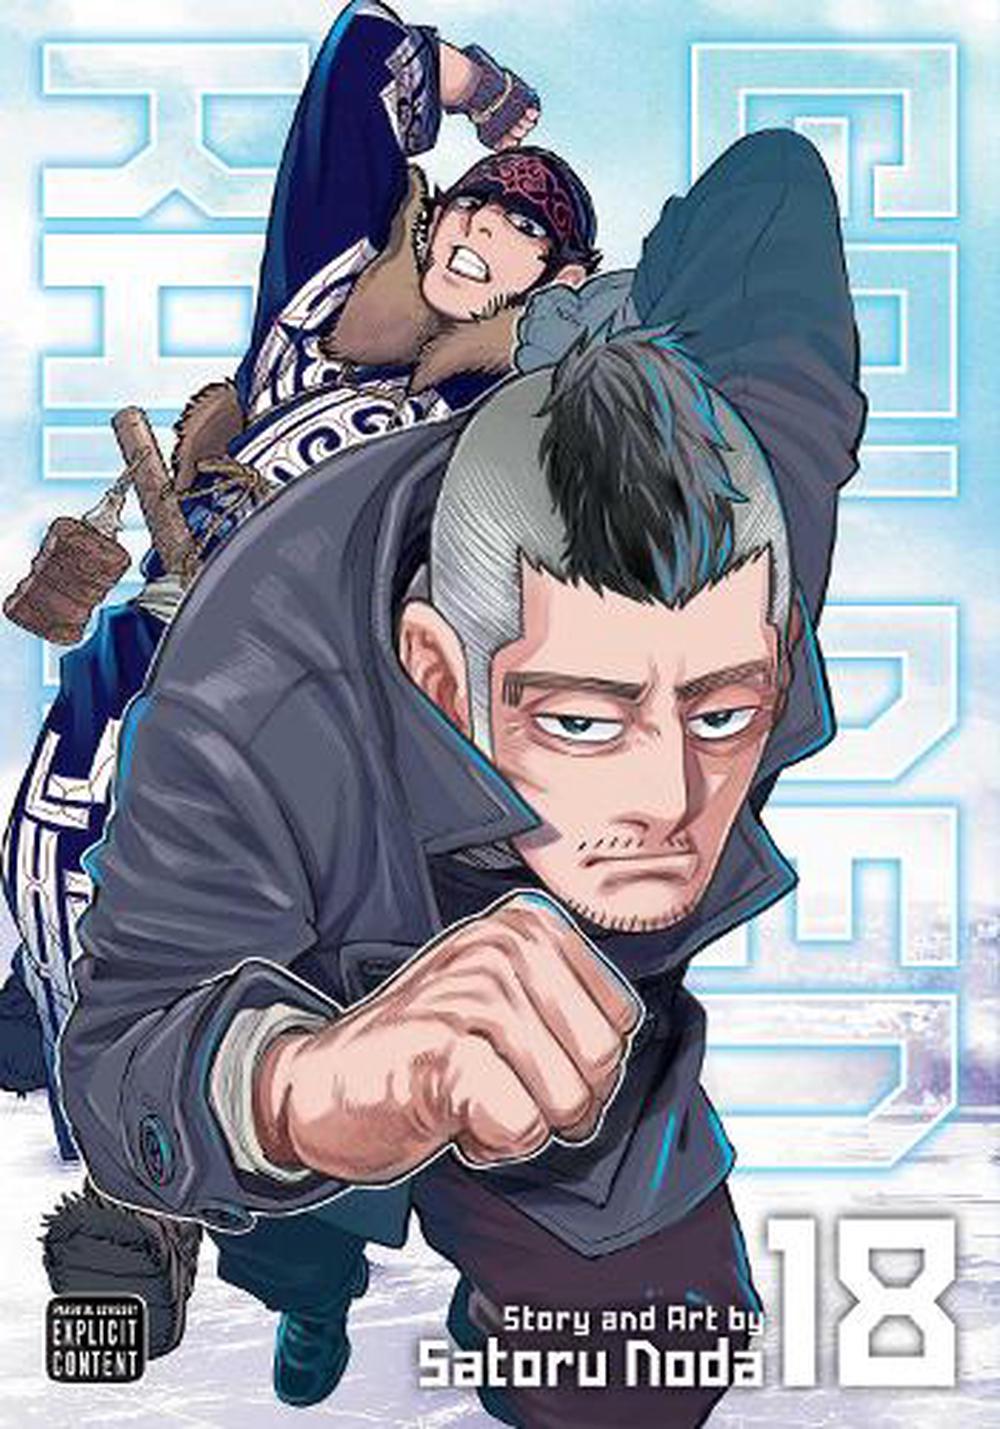 Golden Kamuy Vol 18 By Satoru Noda Paperback Buy Online At Moby The Great